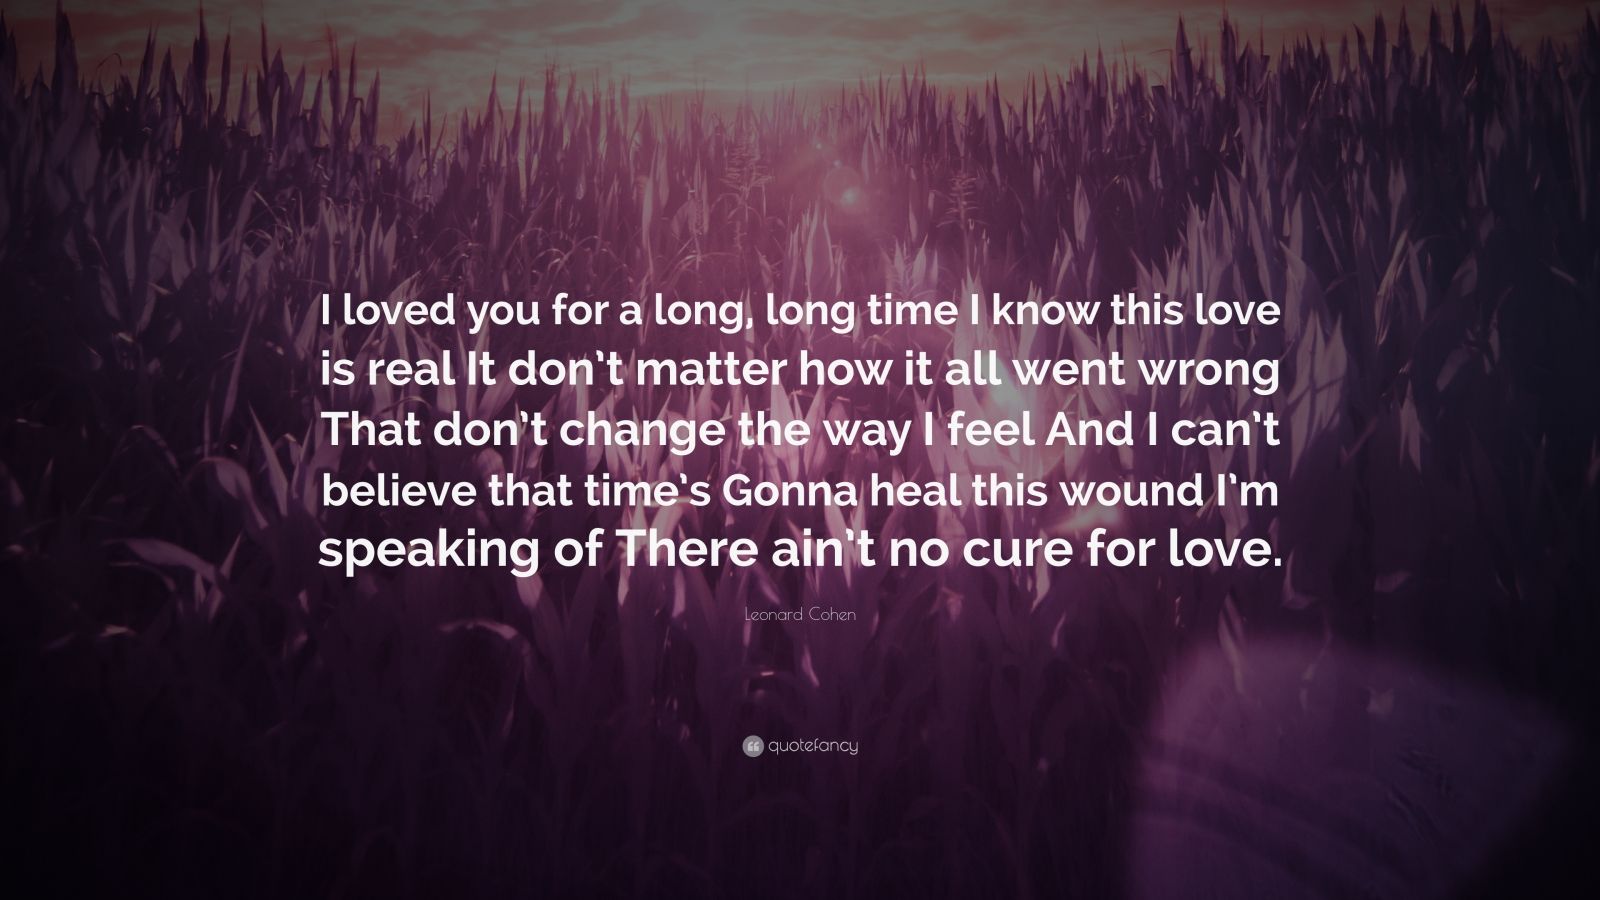 Leonard Cohen Quote “I loved you for a long long time I know